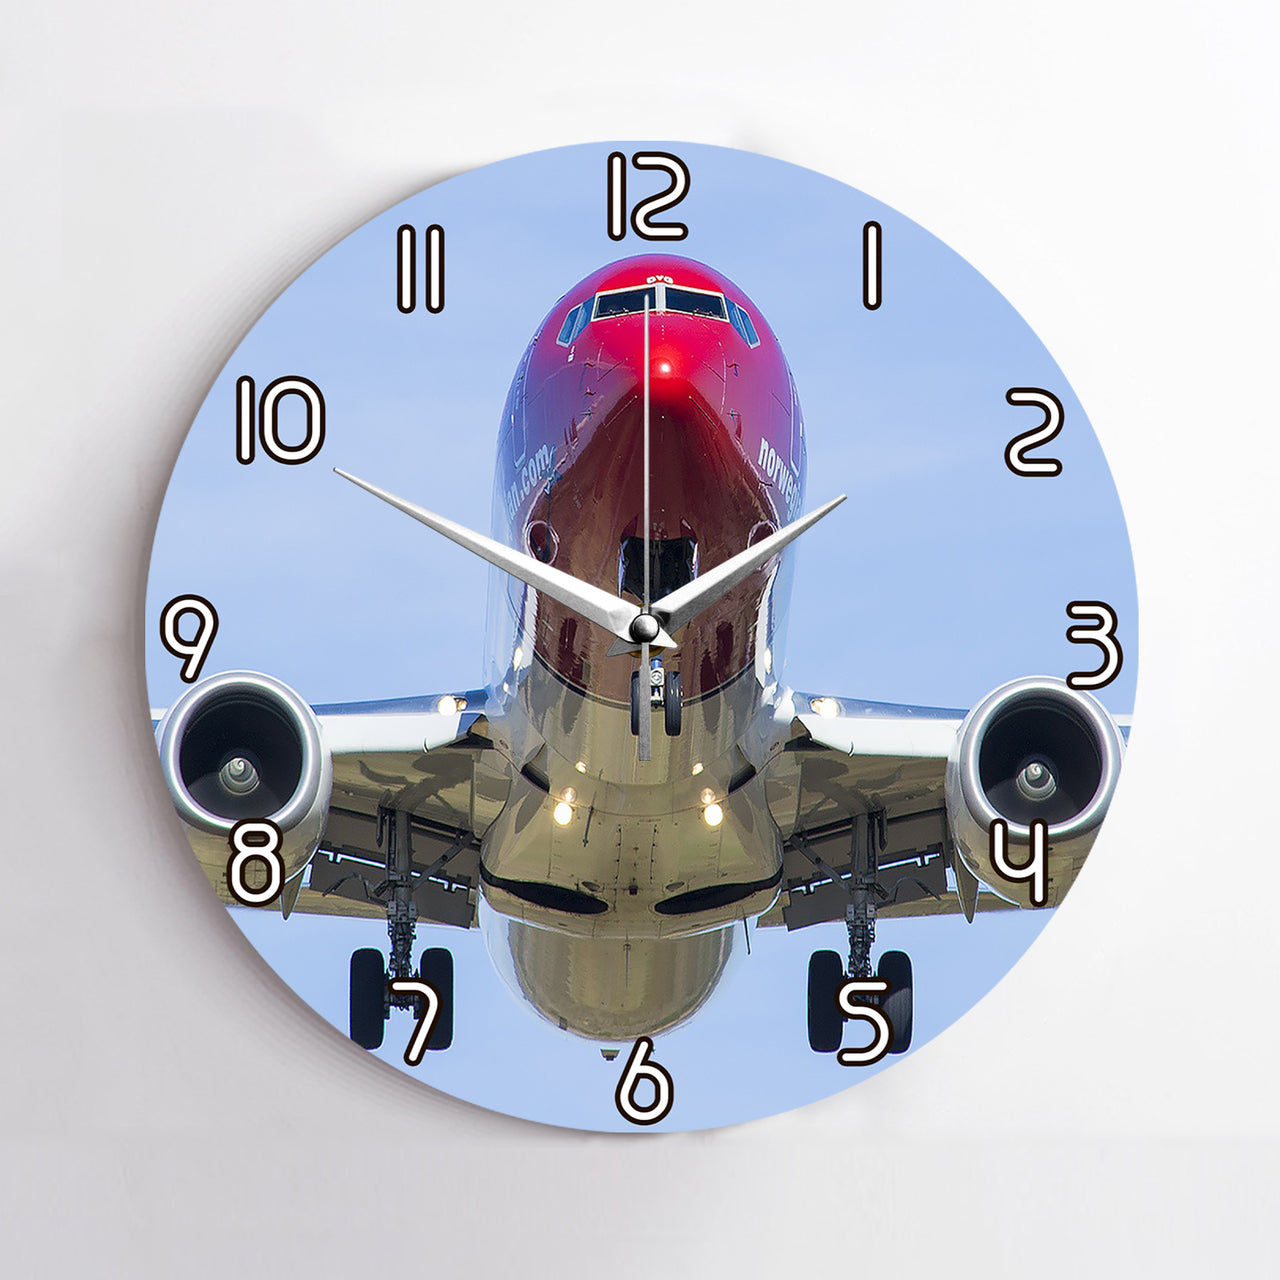 Face to Face with Norwegian Boeing 737 Printed Wall Clocks